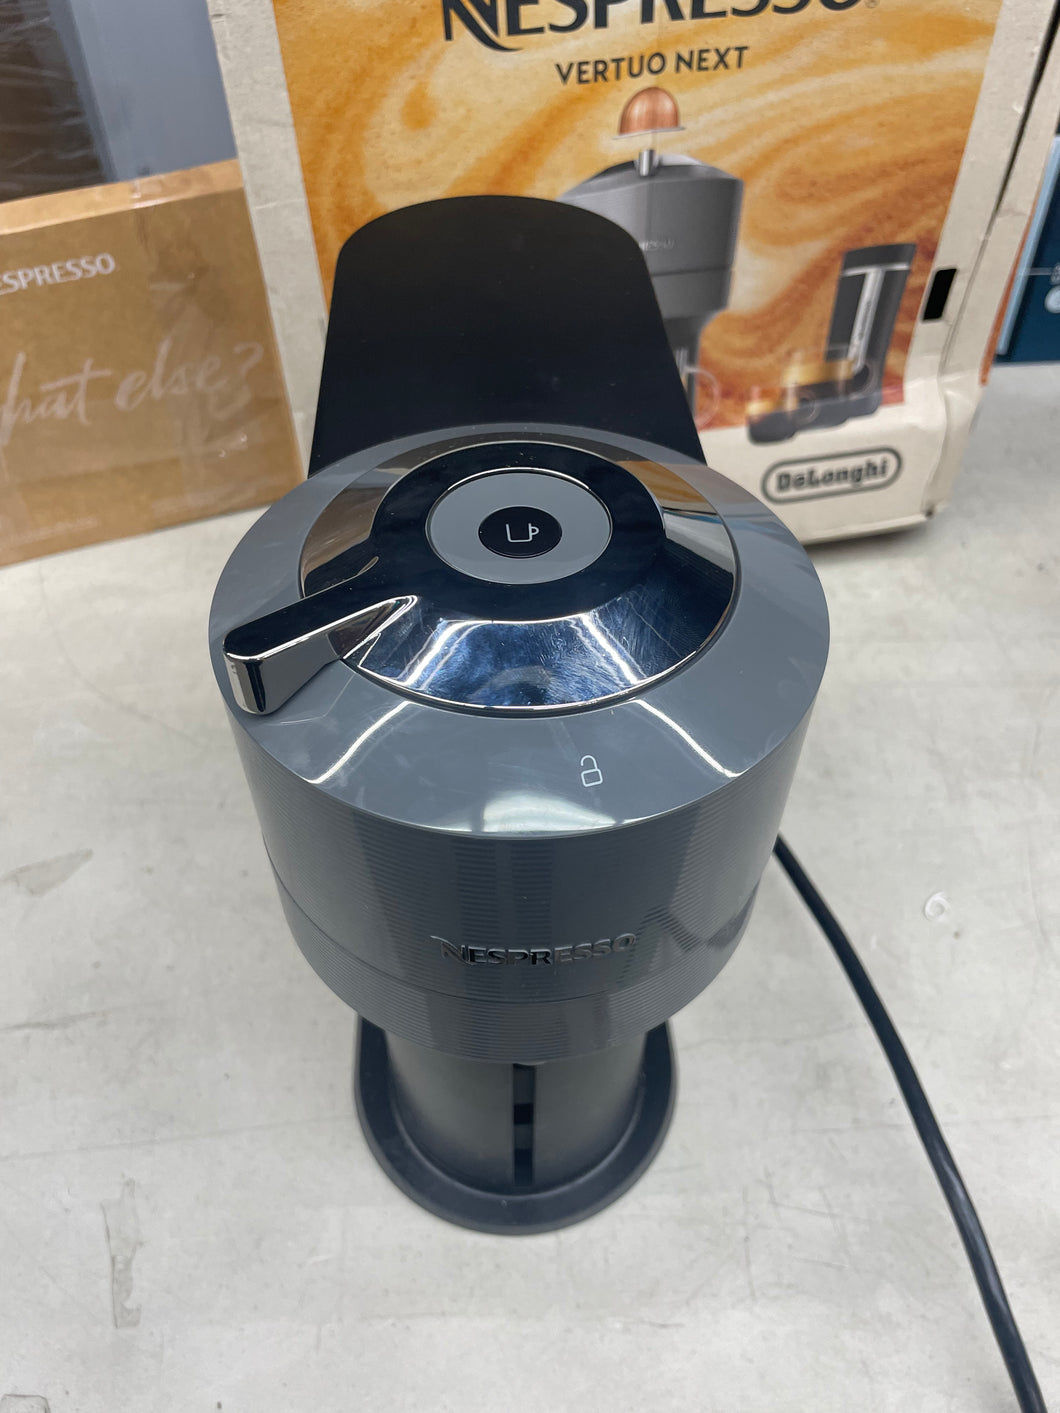 Nespresso Vertuo Next Coffee Maker and Espresso Machine by DeLonghi Gray**Used once, missing one pod and cup holder**